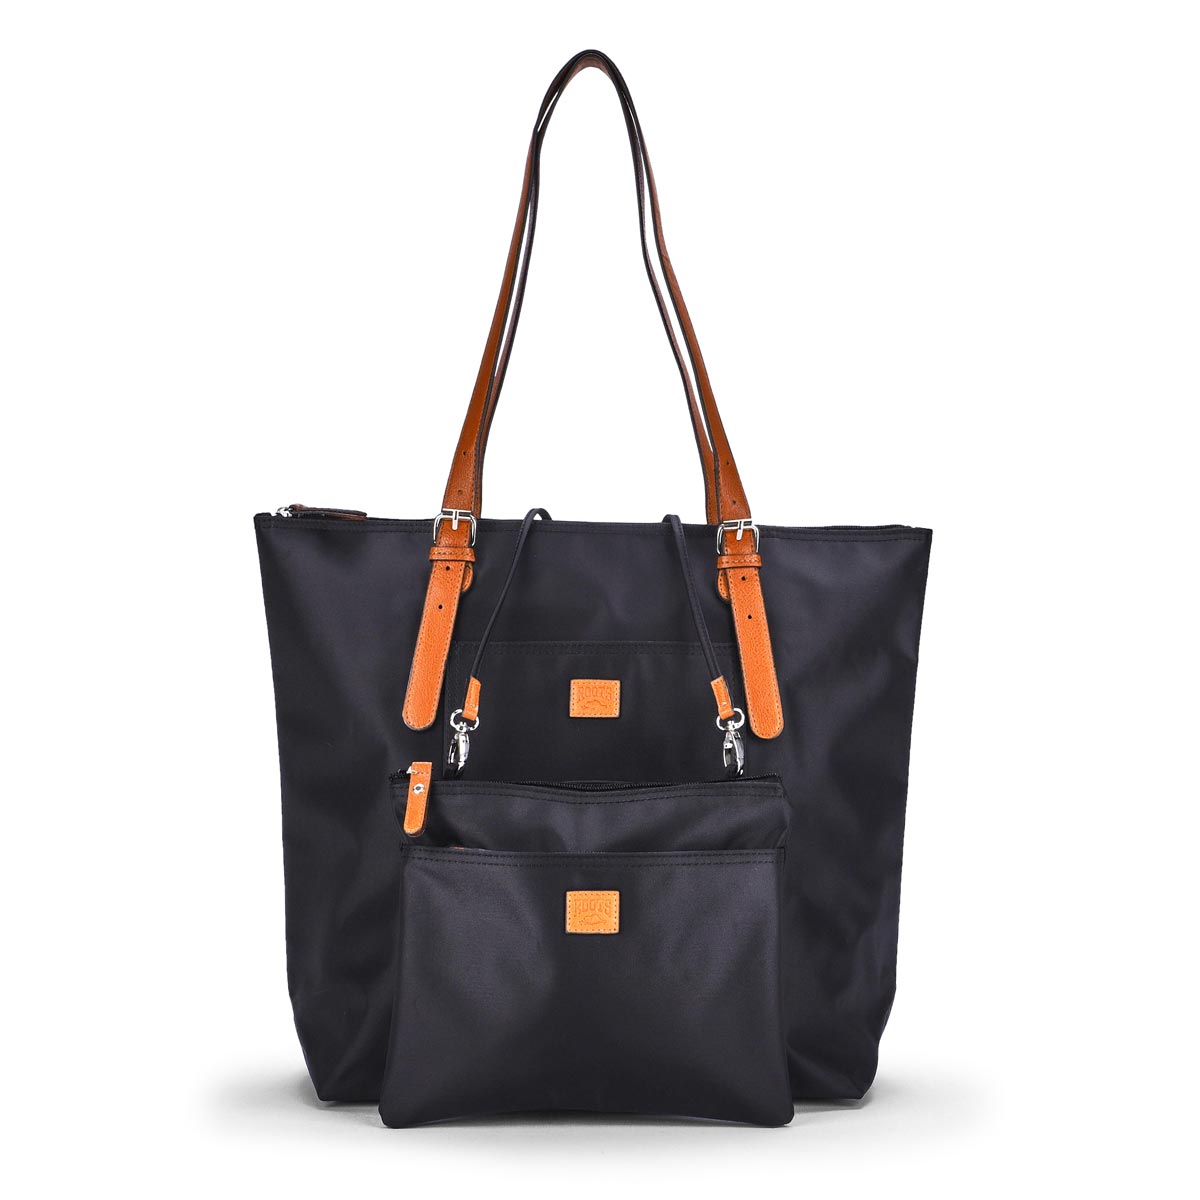 Roots Women's R4324 black 2 in 1 tote/crossbo | Softmoc.com